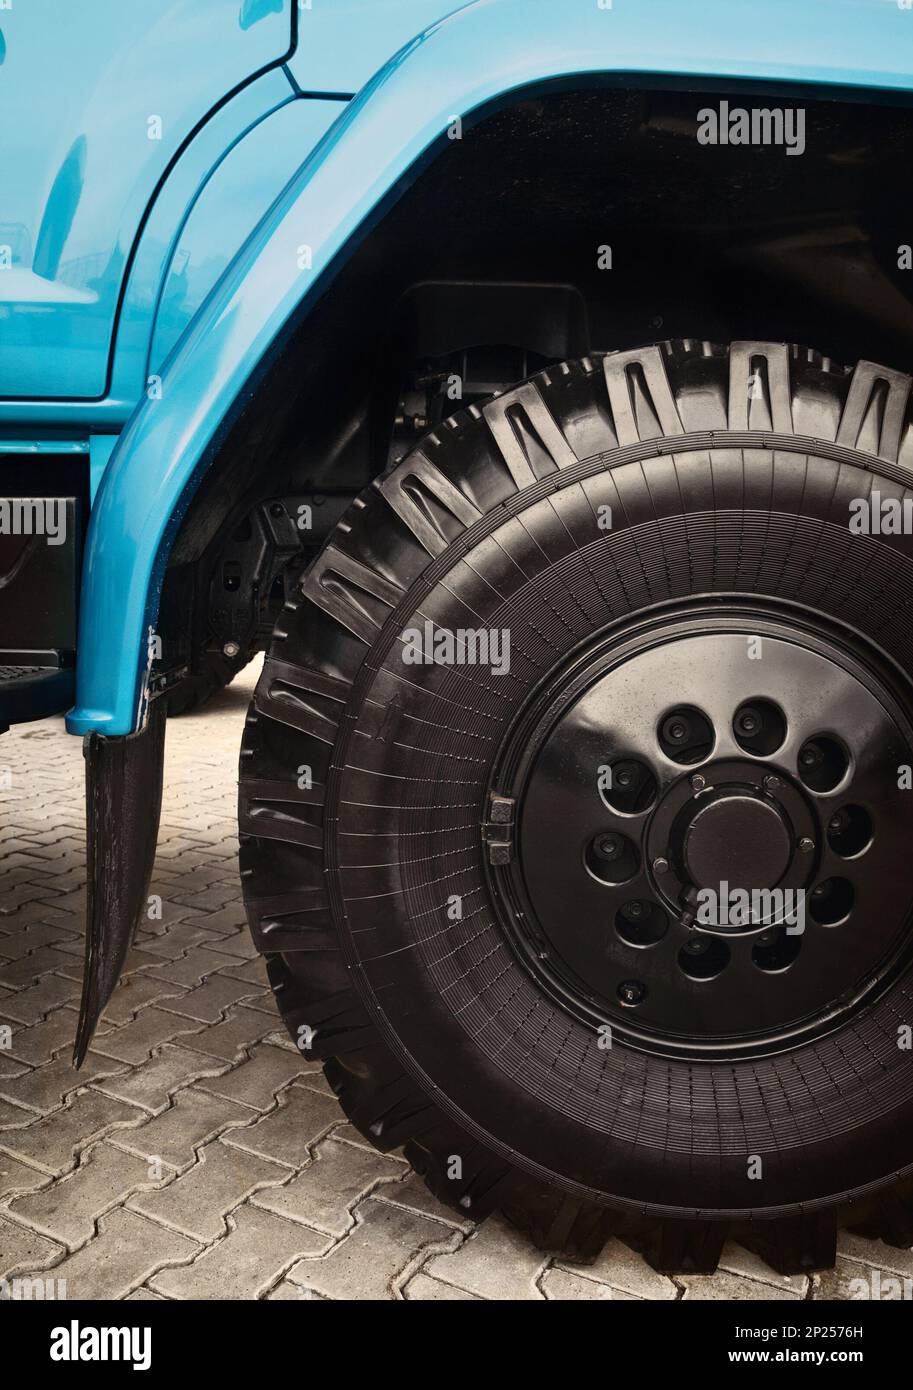 Big heavy truck wheel close-up. Black and blue tipper detail background Stock Photo